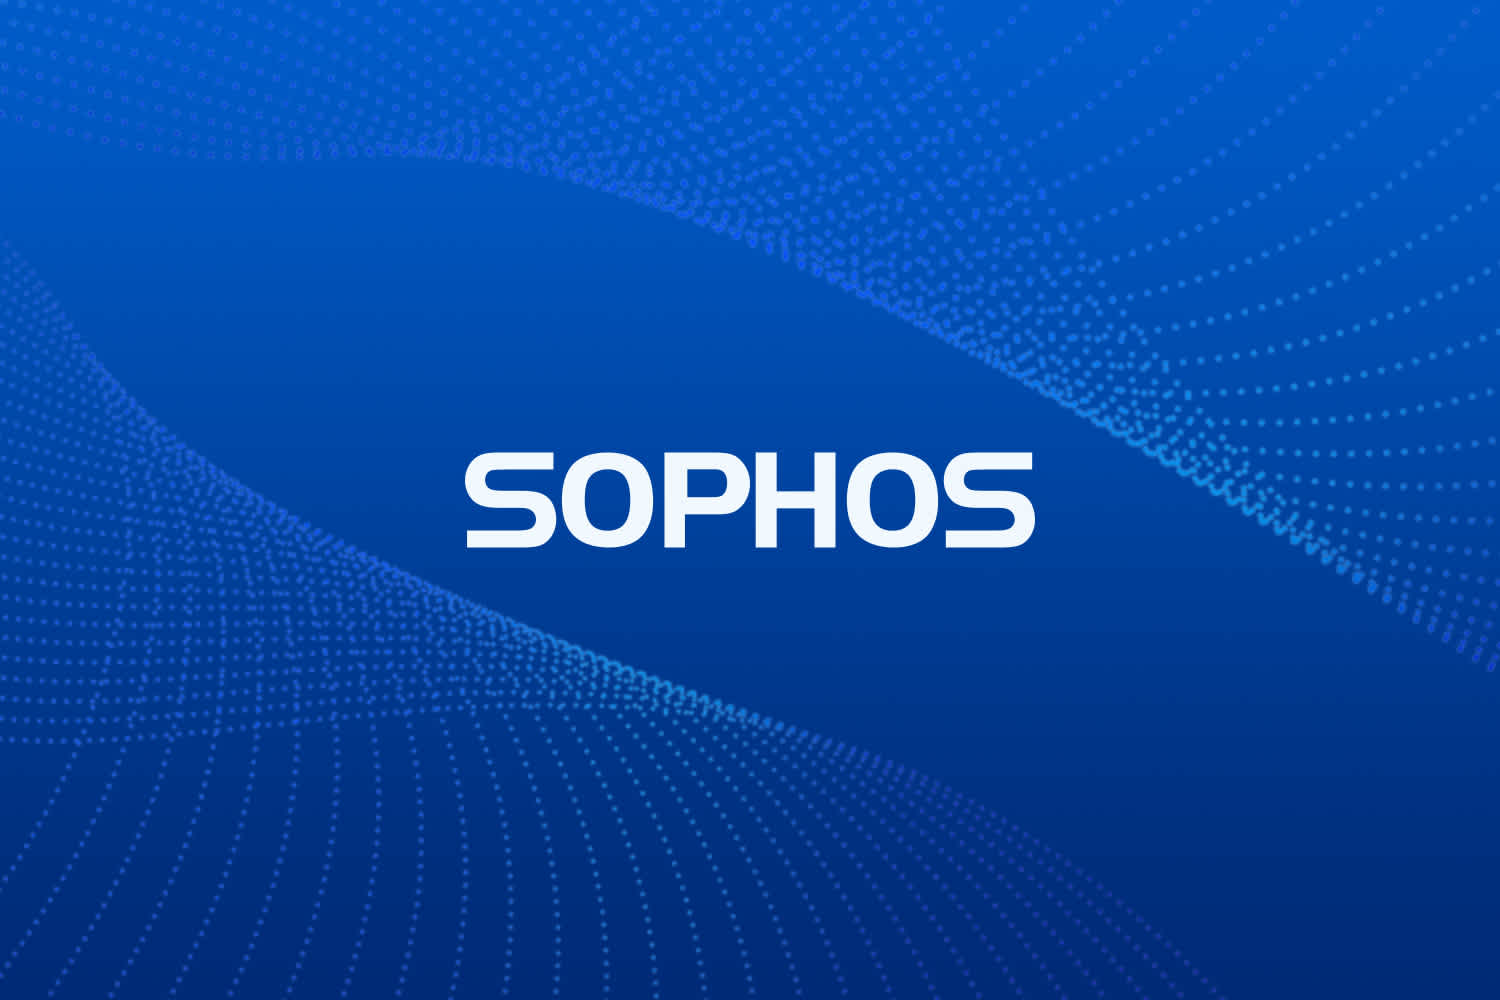 Sophos recognized as leader in Endpoint Security